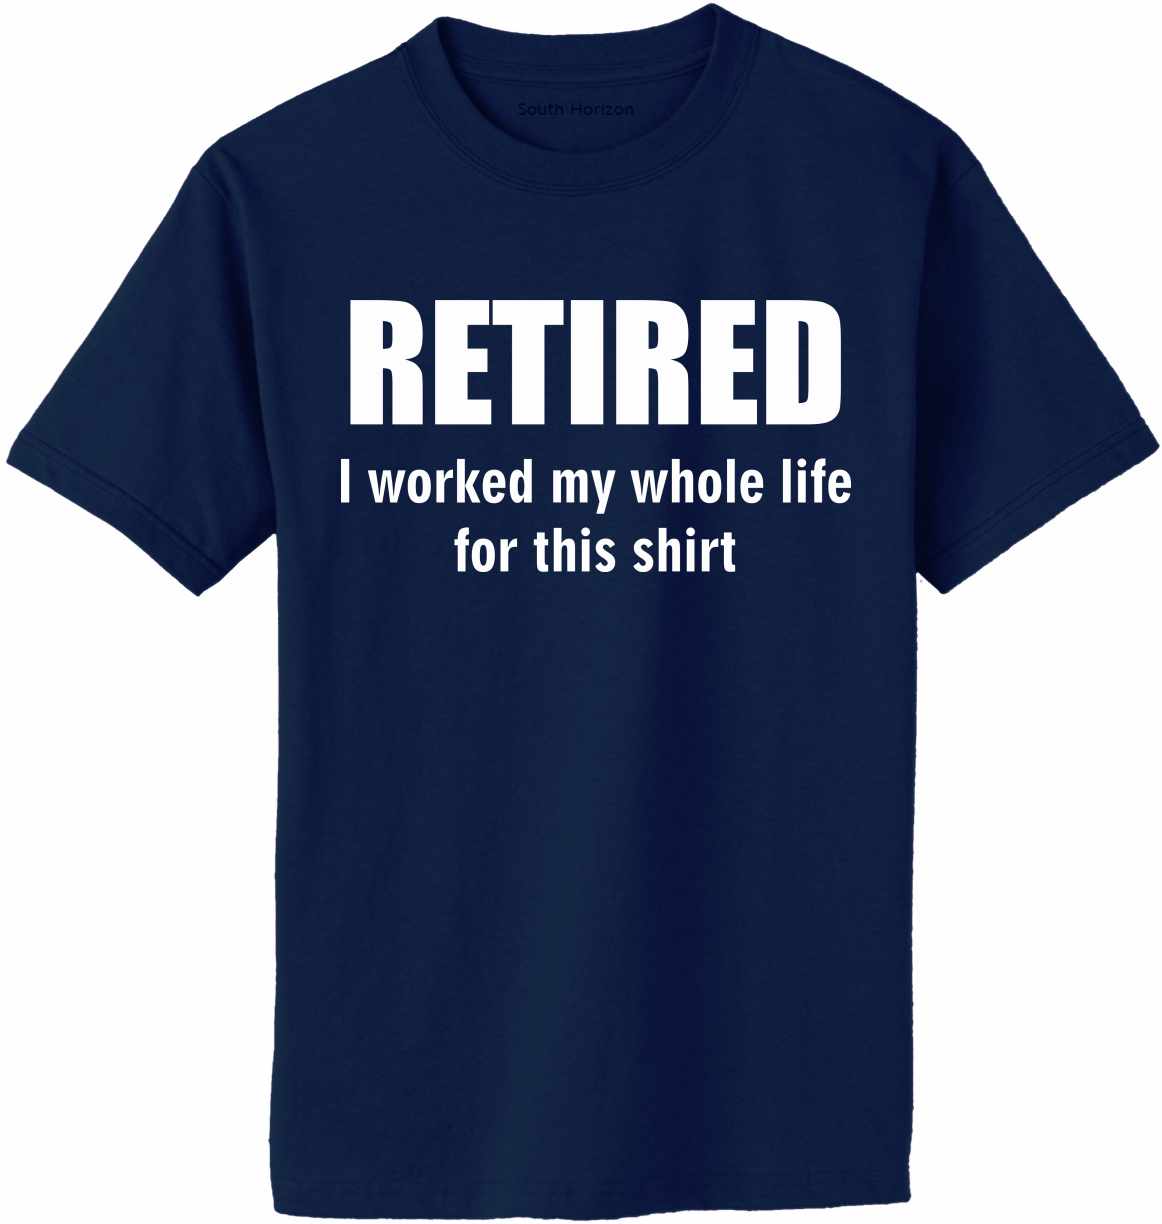 RETIRED, I worked my whole life for this shirt Adult T-Shirt